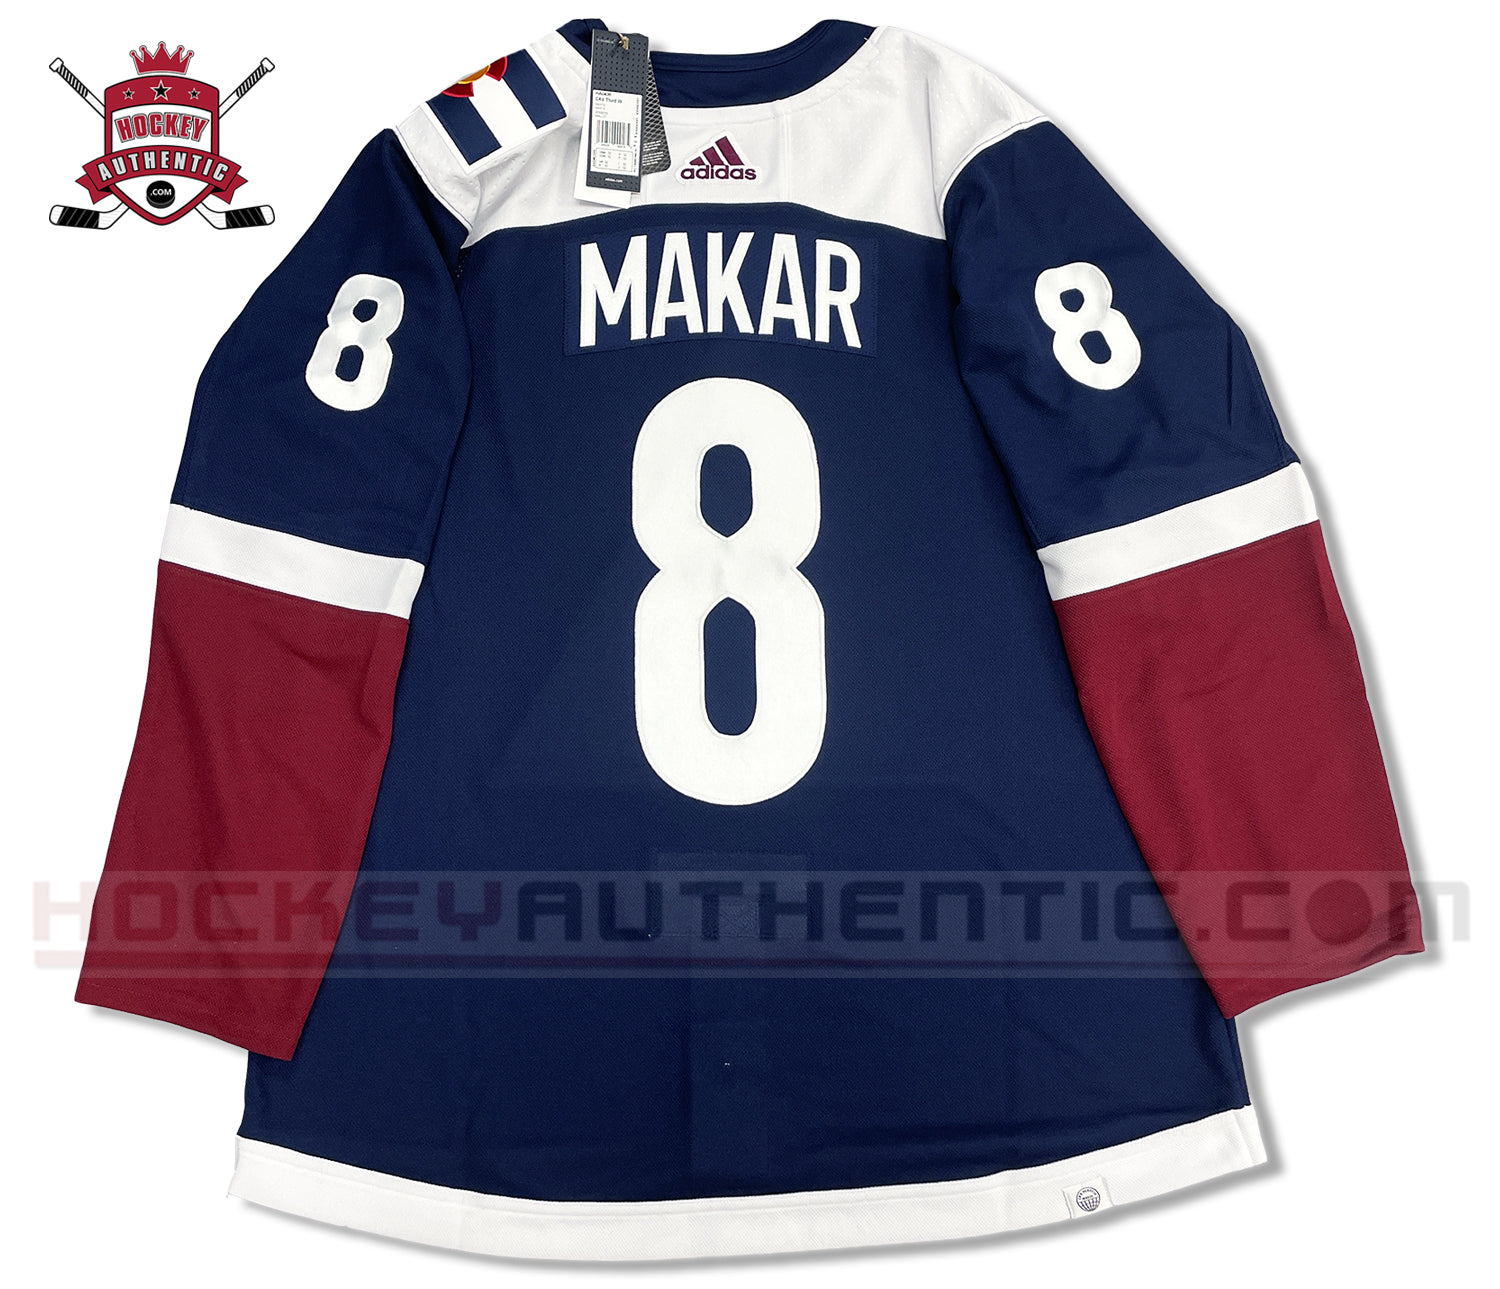 Adding to my small collection with the Makar Reverse retro jersey